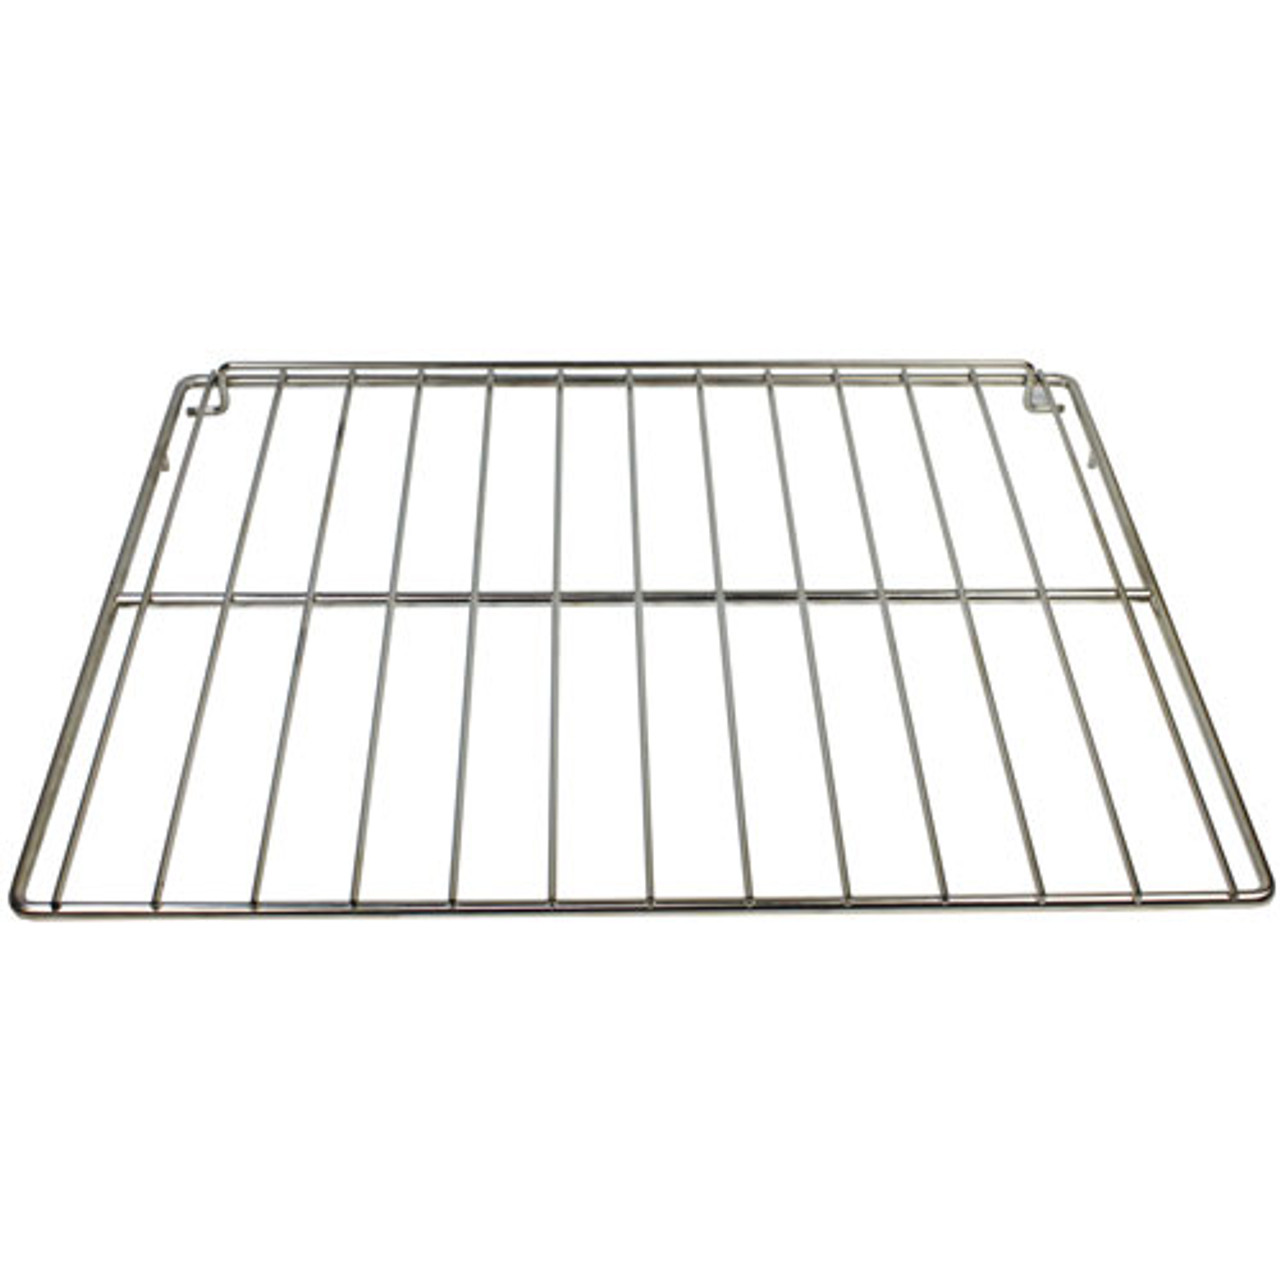 Oven Rack - Replacement Part For Garland 4522409